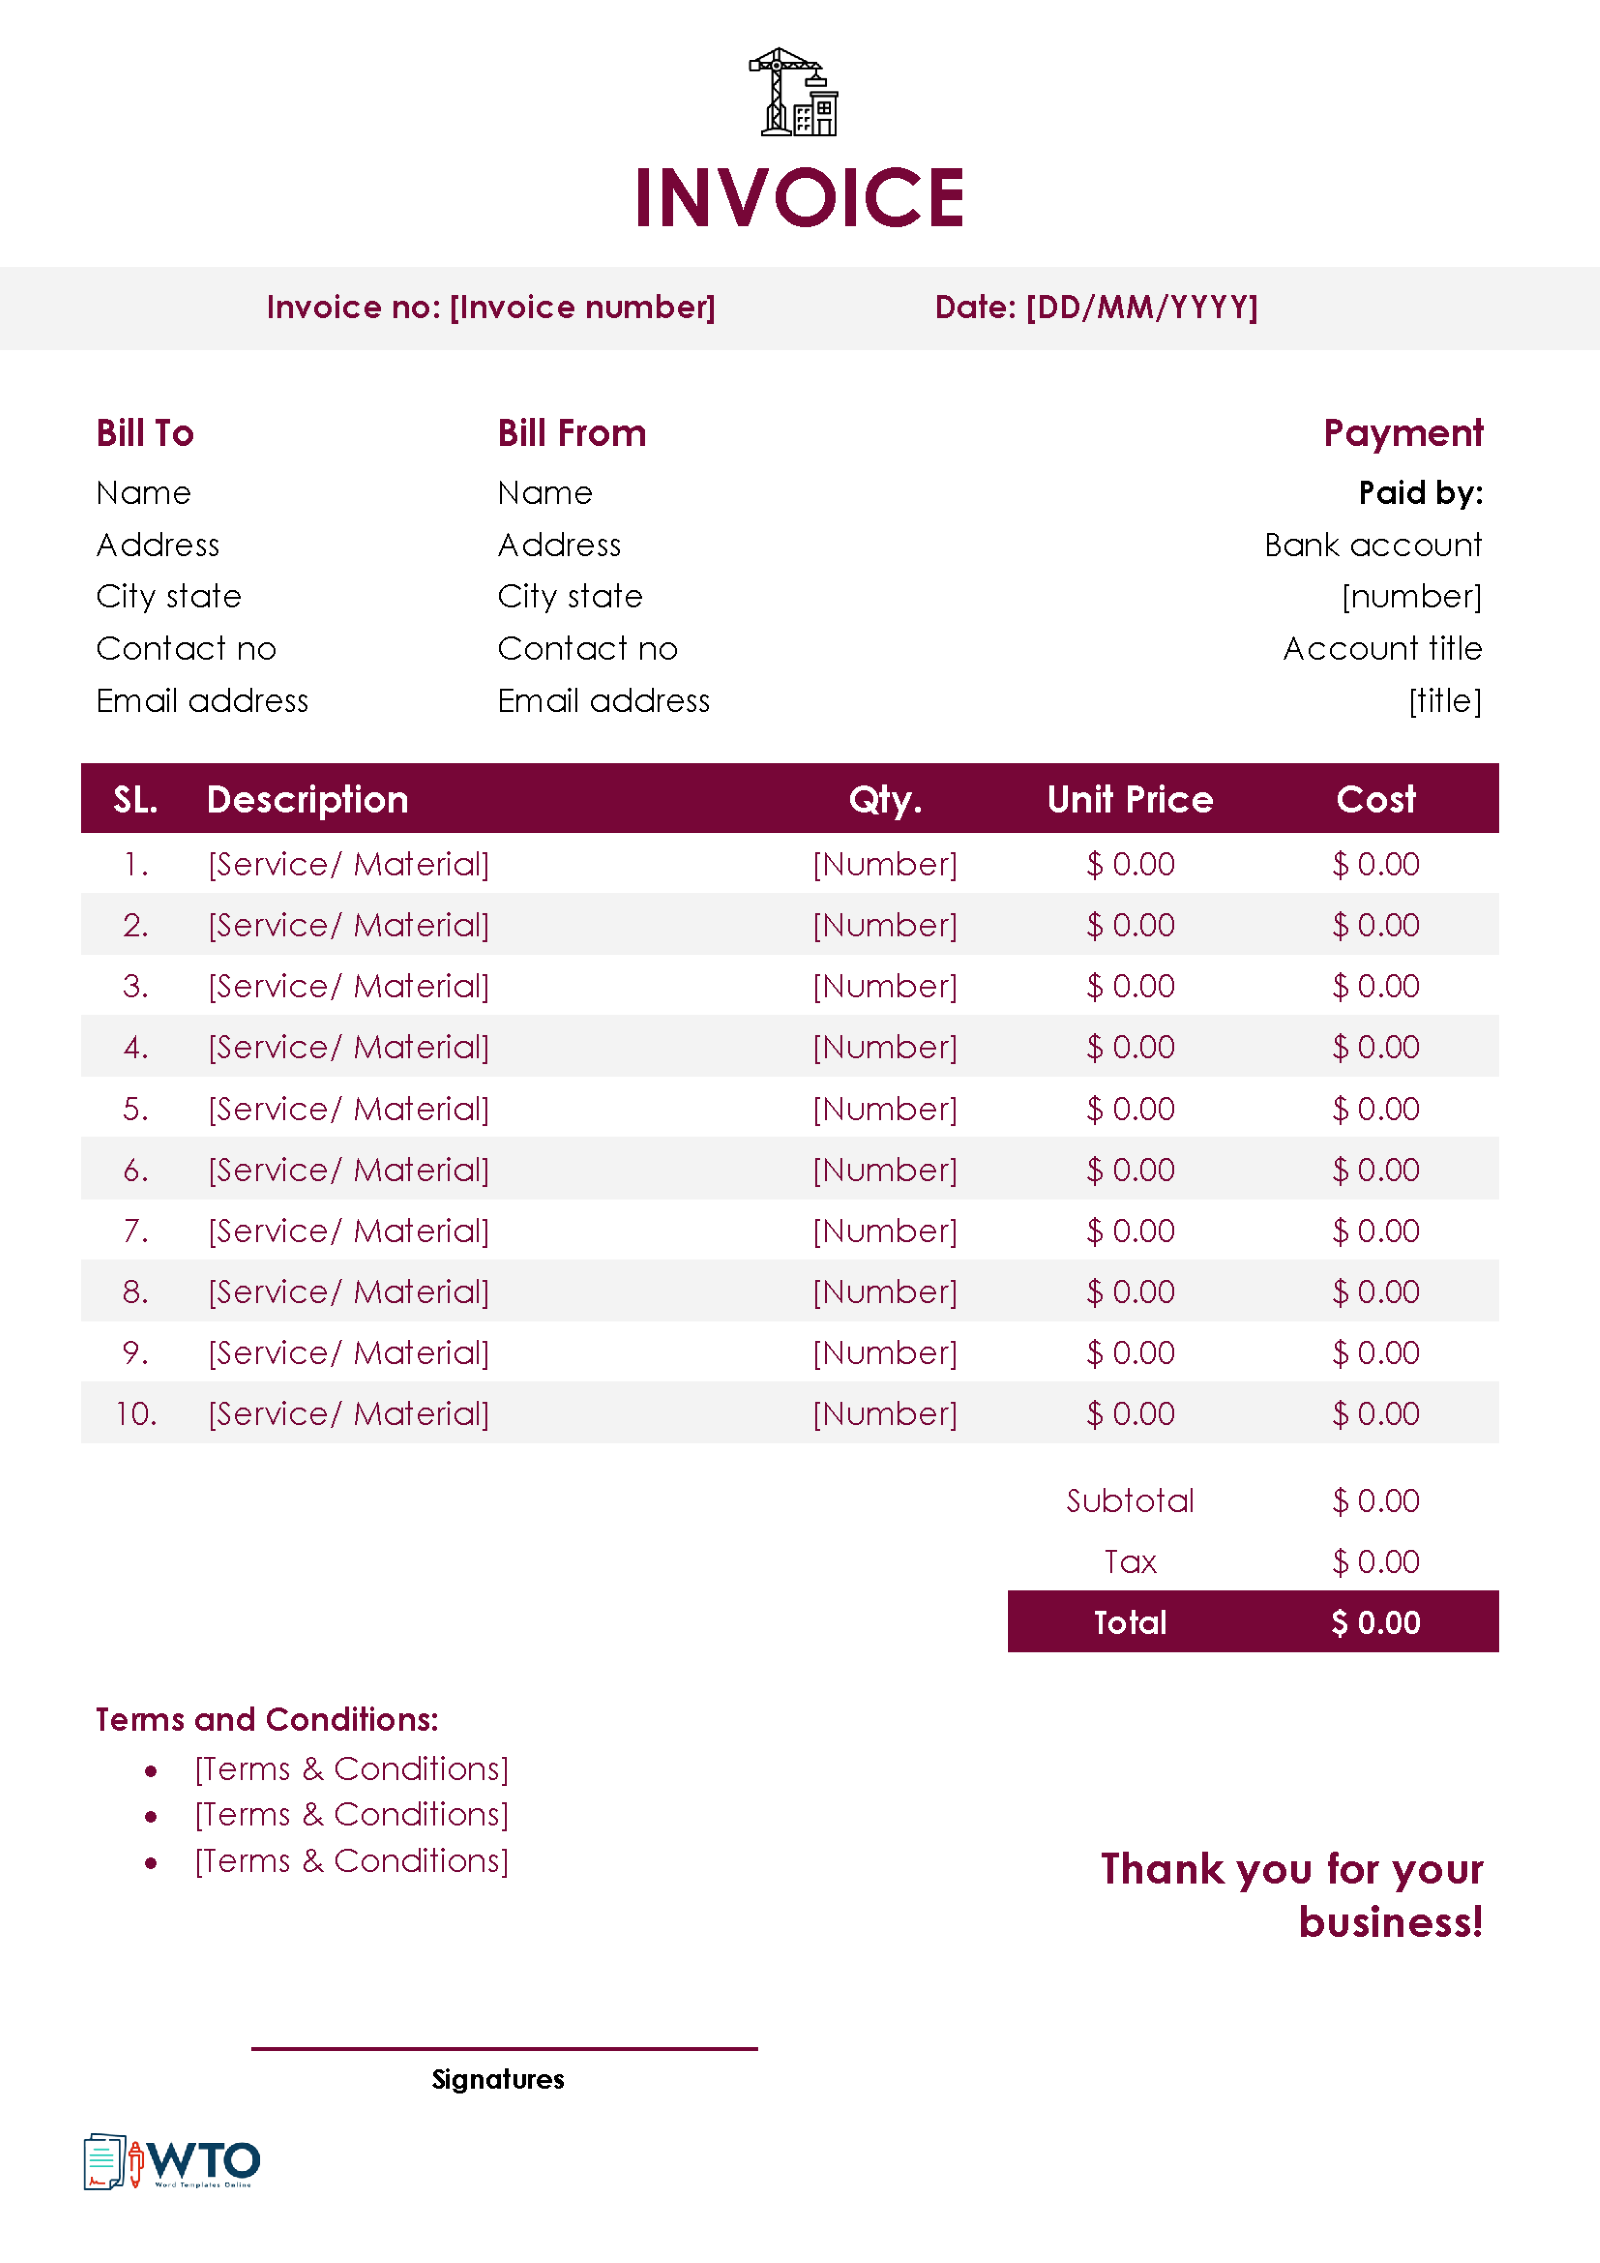 Creating a Construction Invoice - Sample Template